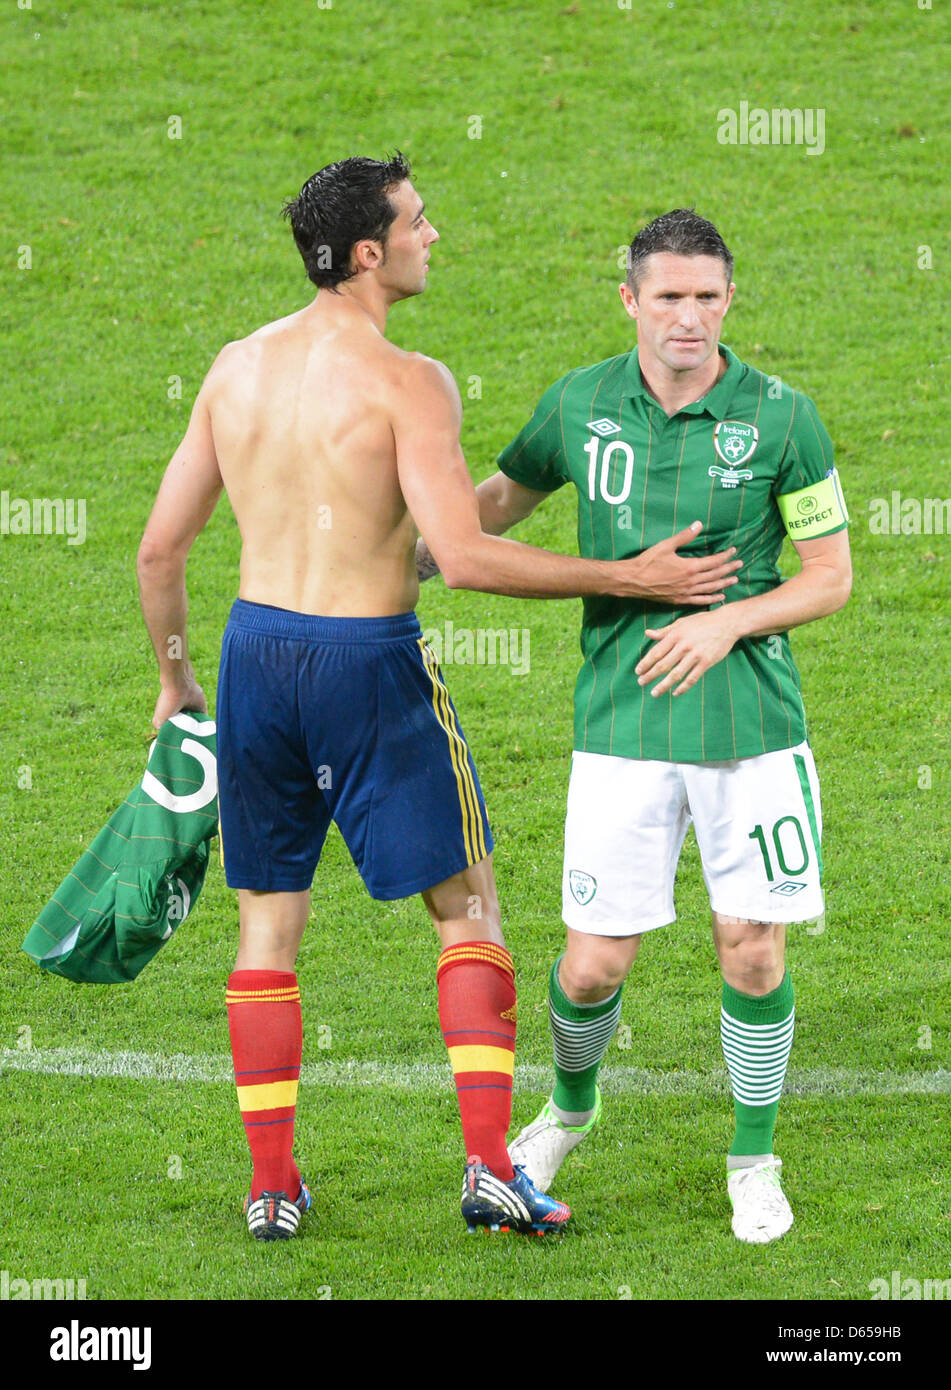 Spain's Santi Cazorla (L) comforts Ireland's Robbie Keane during the UEFA EURO 2012 group C soccer match Spain vs Republic of Ireland at Arena Gdansk in Gdansk, Poland, 14 June 2012. Photo: Marcus Brandt dpa (Please refer to chapters 7 and 8 of http://dpaq.de/Ziovh for UEFA Euro 2012 Terms & Conditions)  +++(c) dpa - Bildfunk+++ Stock Photo